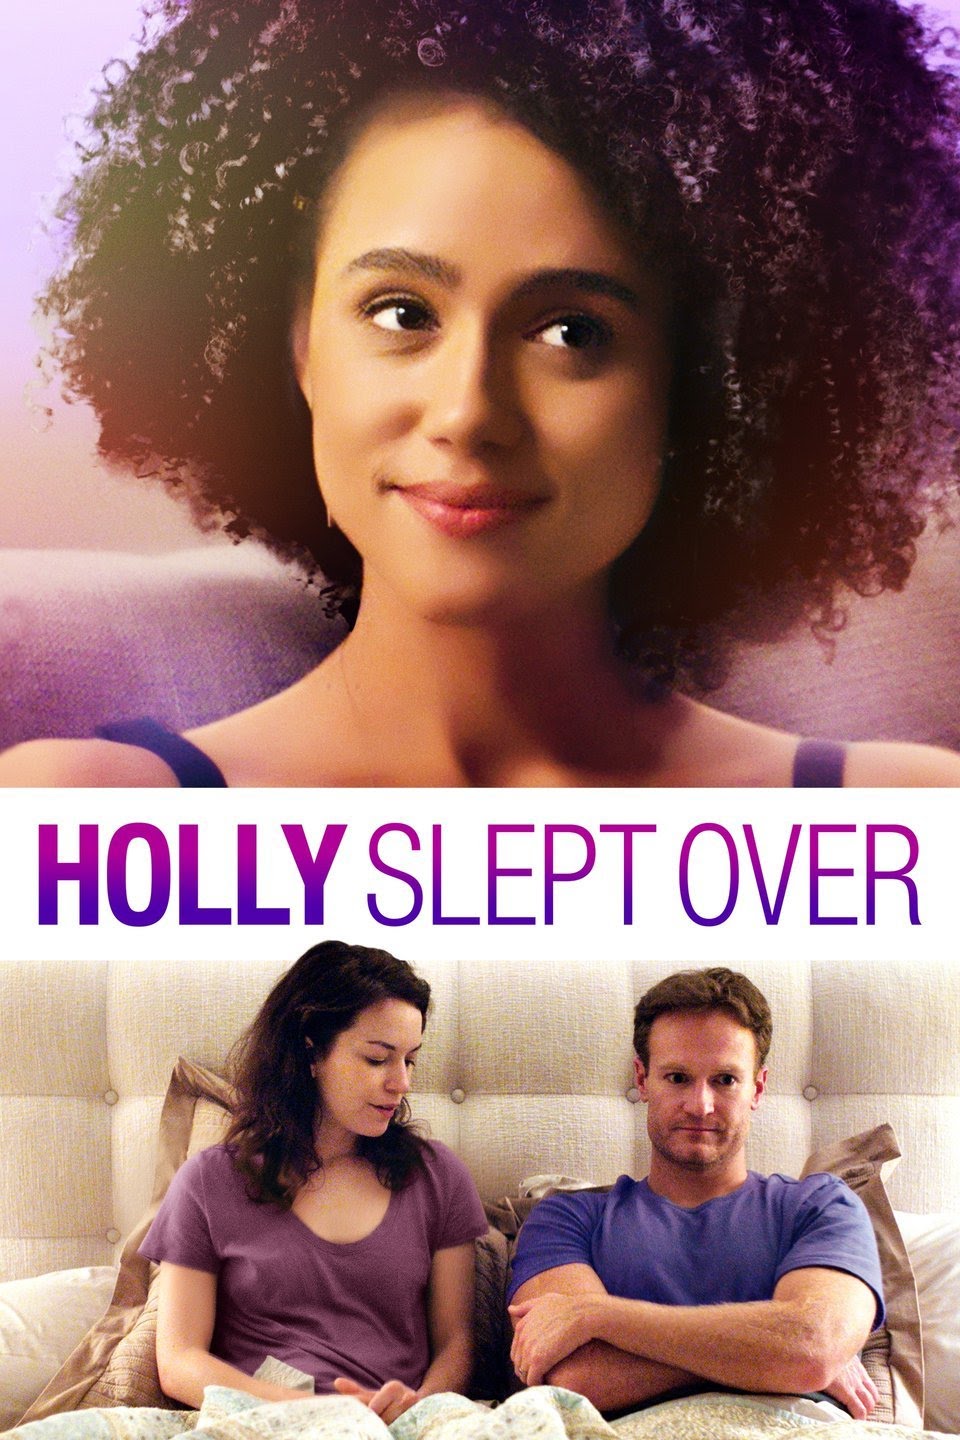  Holly Slept Over (2020) - Hollywood